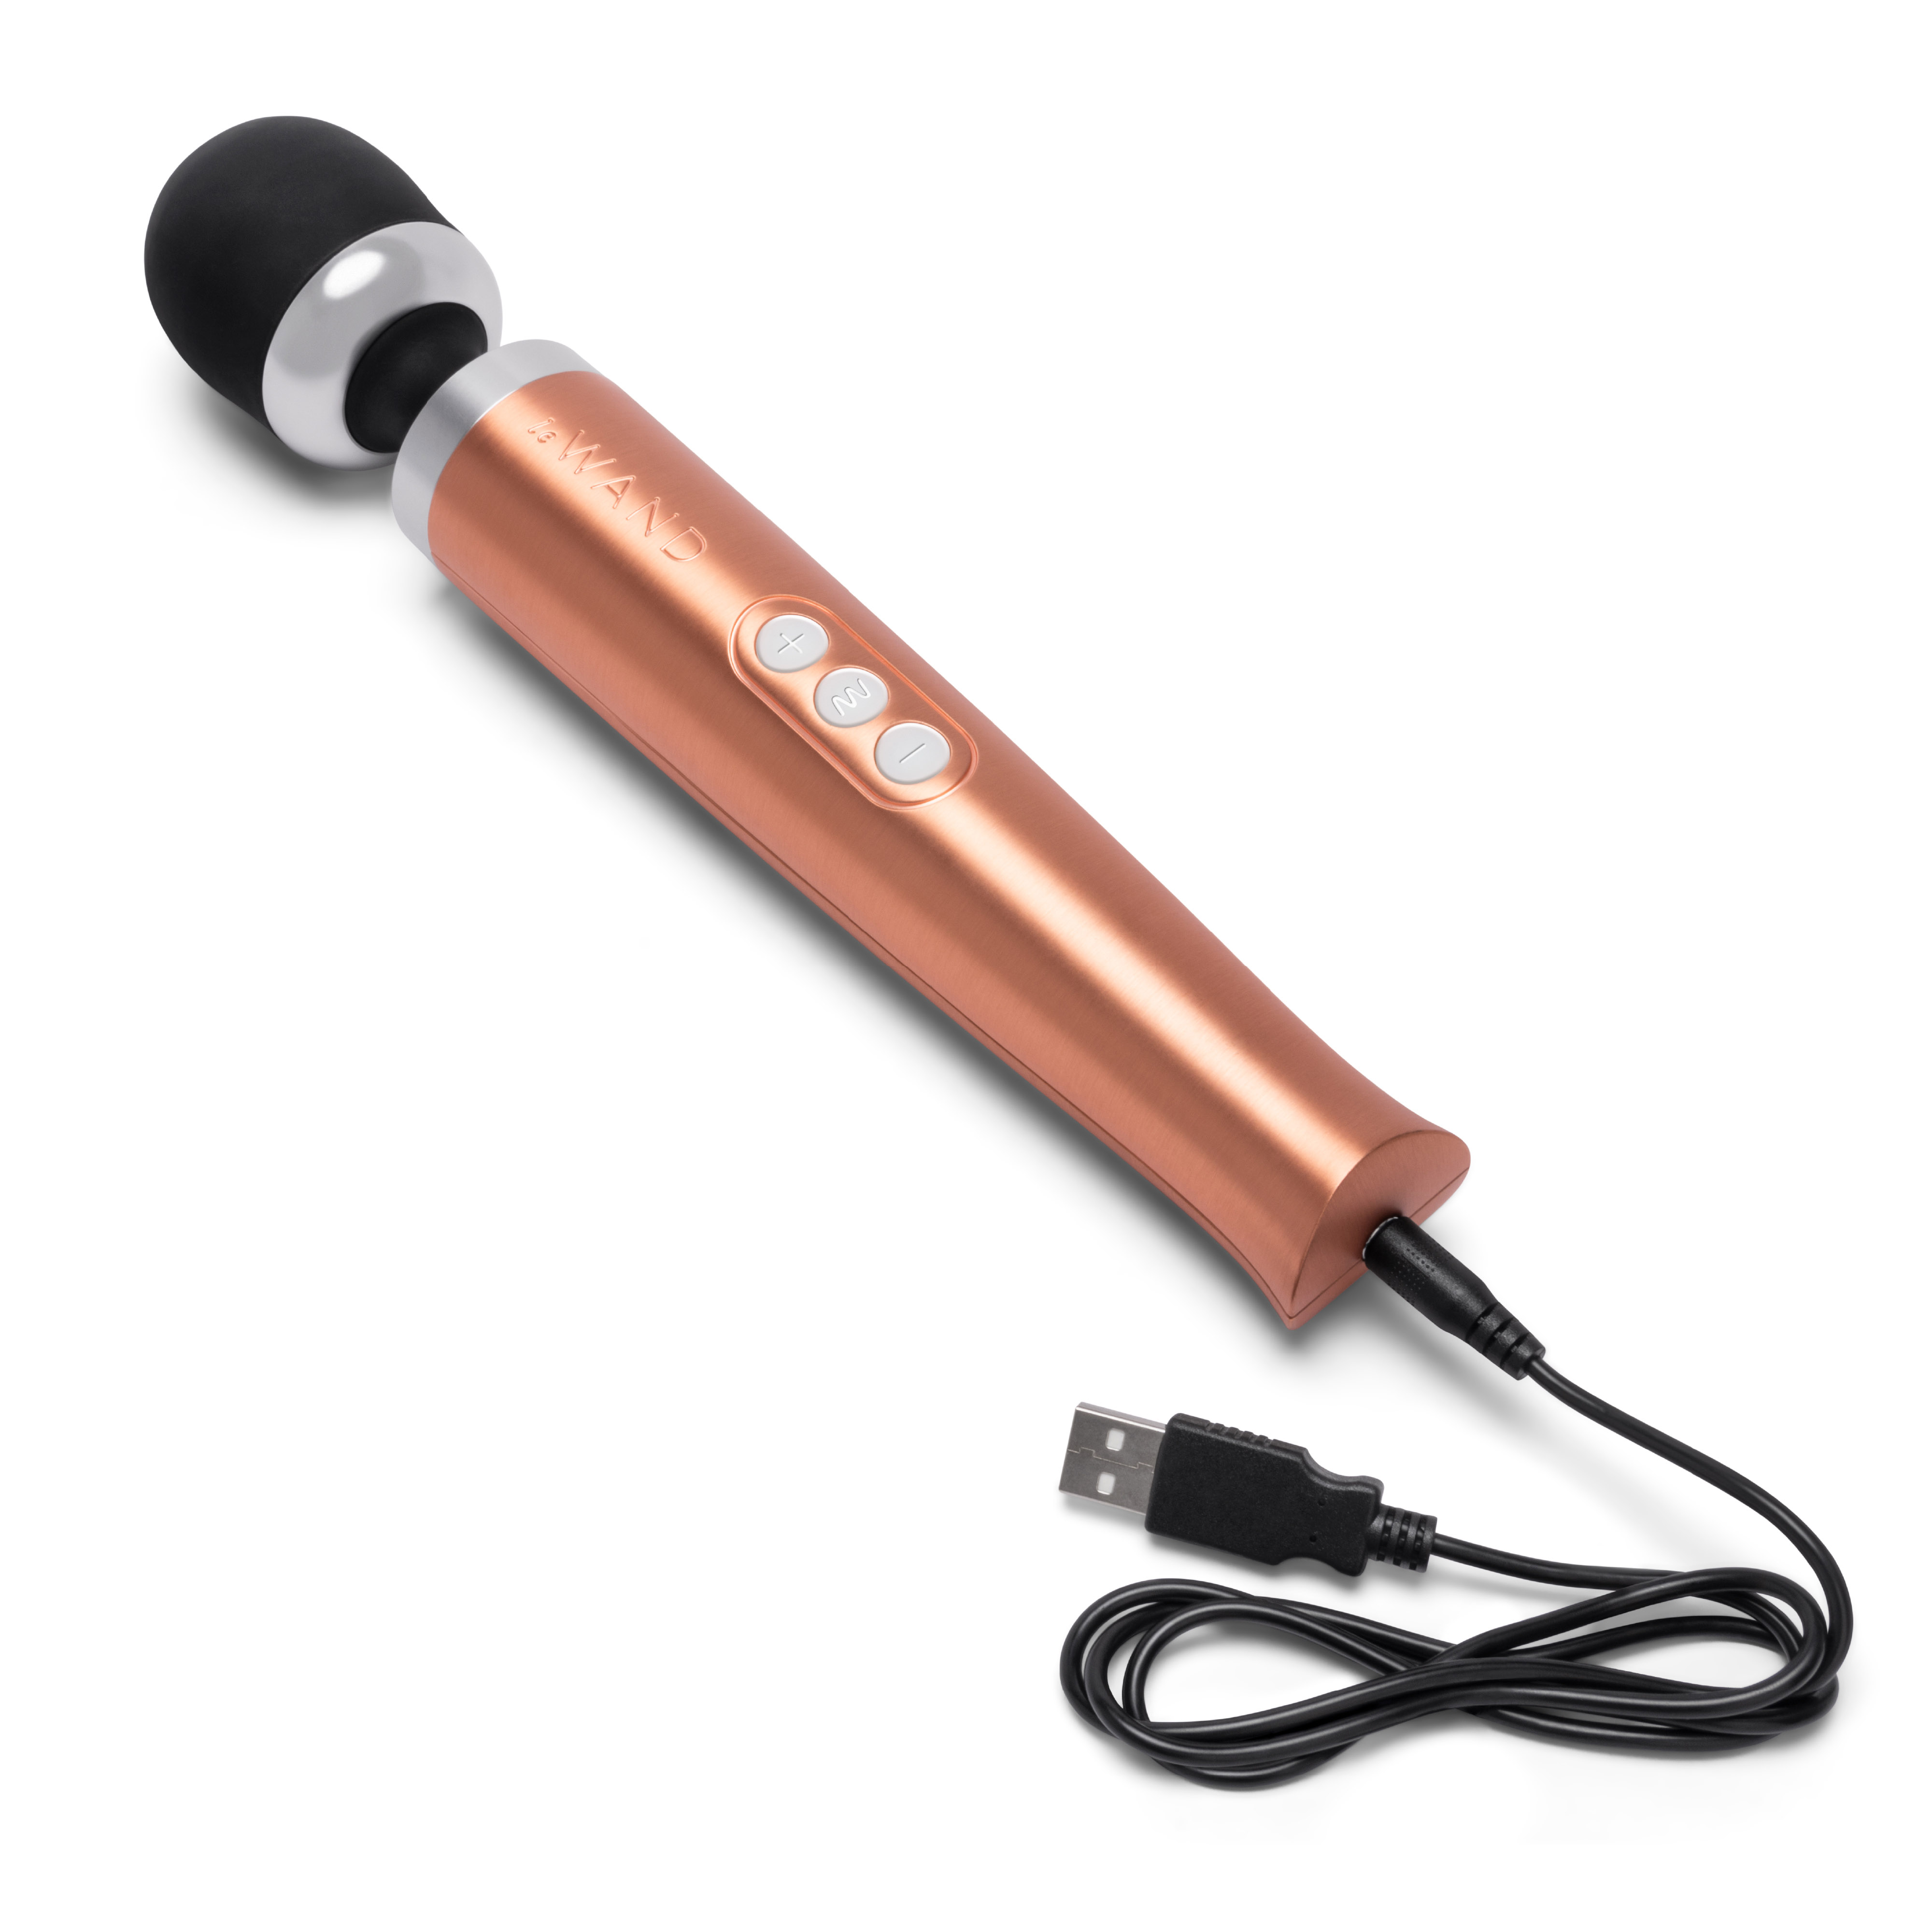 Le Wand Die Cast rechargeable massager rose gold 